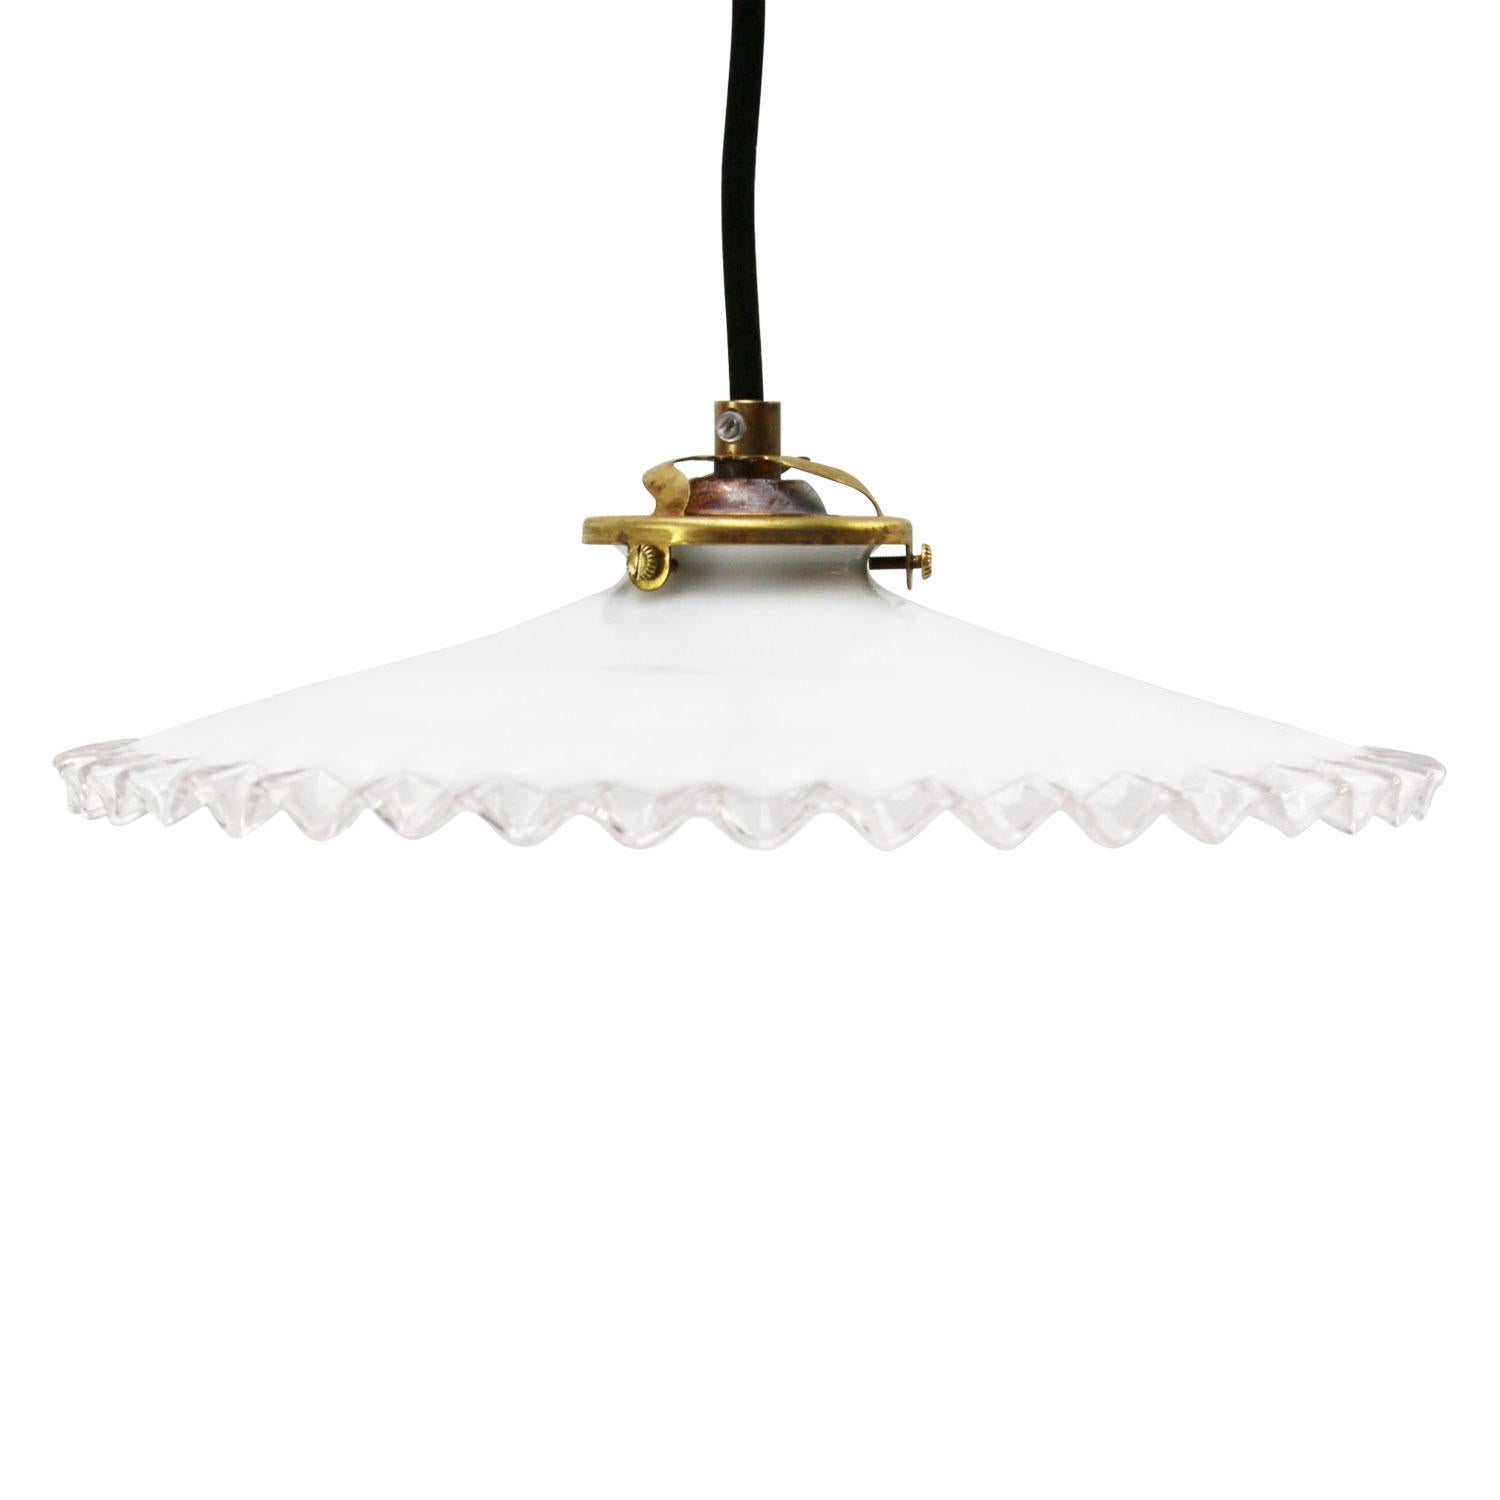 French opaline glass Industrial pendant. 

Weight 0.70 kg / 1.5 lb

Priced per individual item. All lamps have been made suitable by international standards for incandescent light bulbs, energy-efficient and LED bulbs. E26/E27 bulb holders and